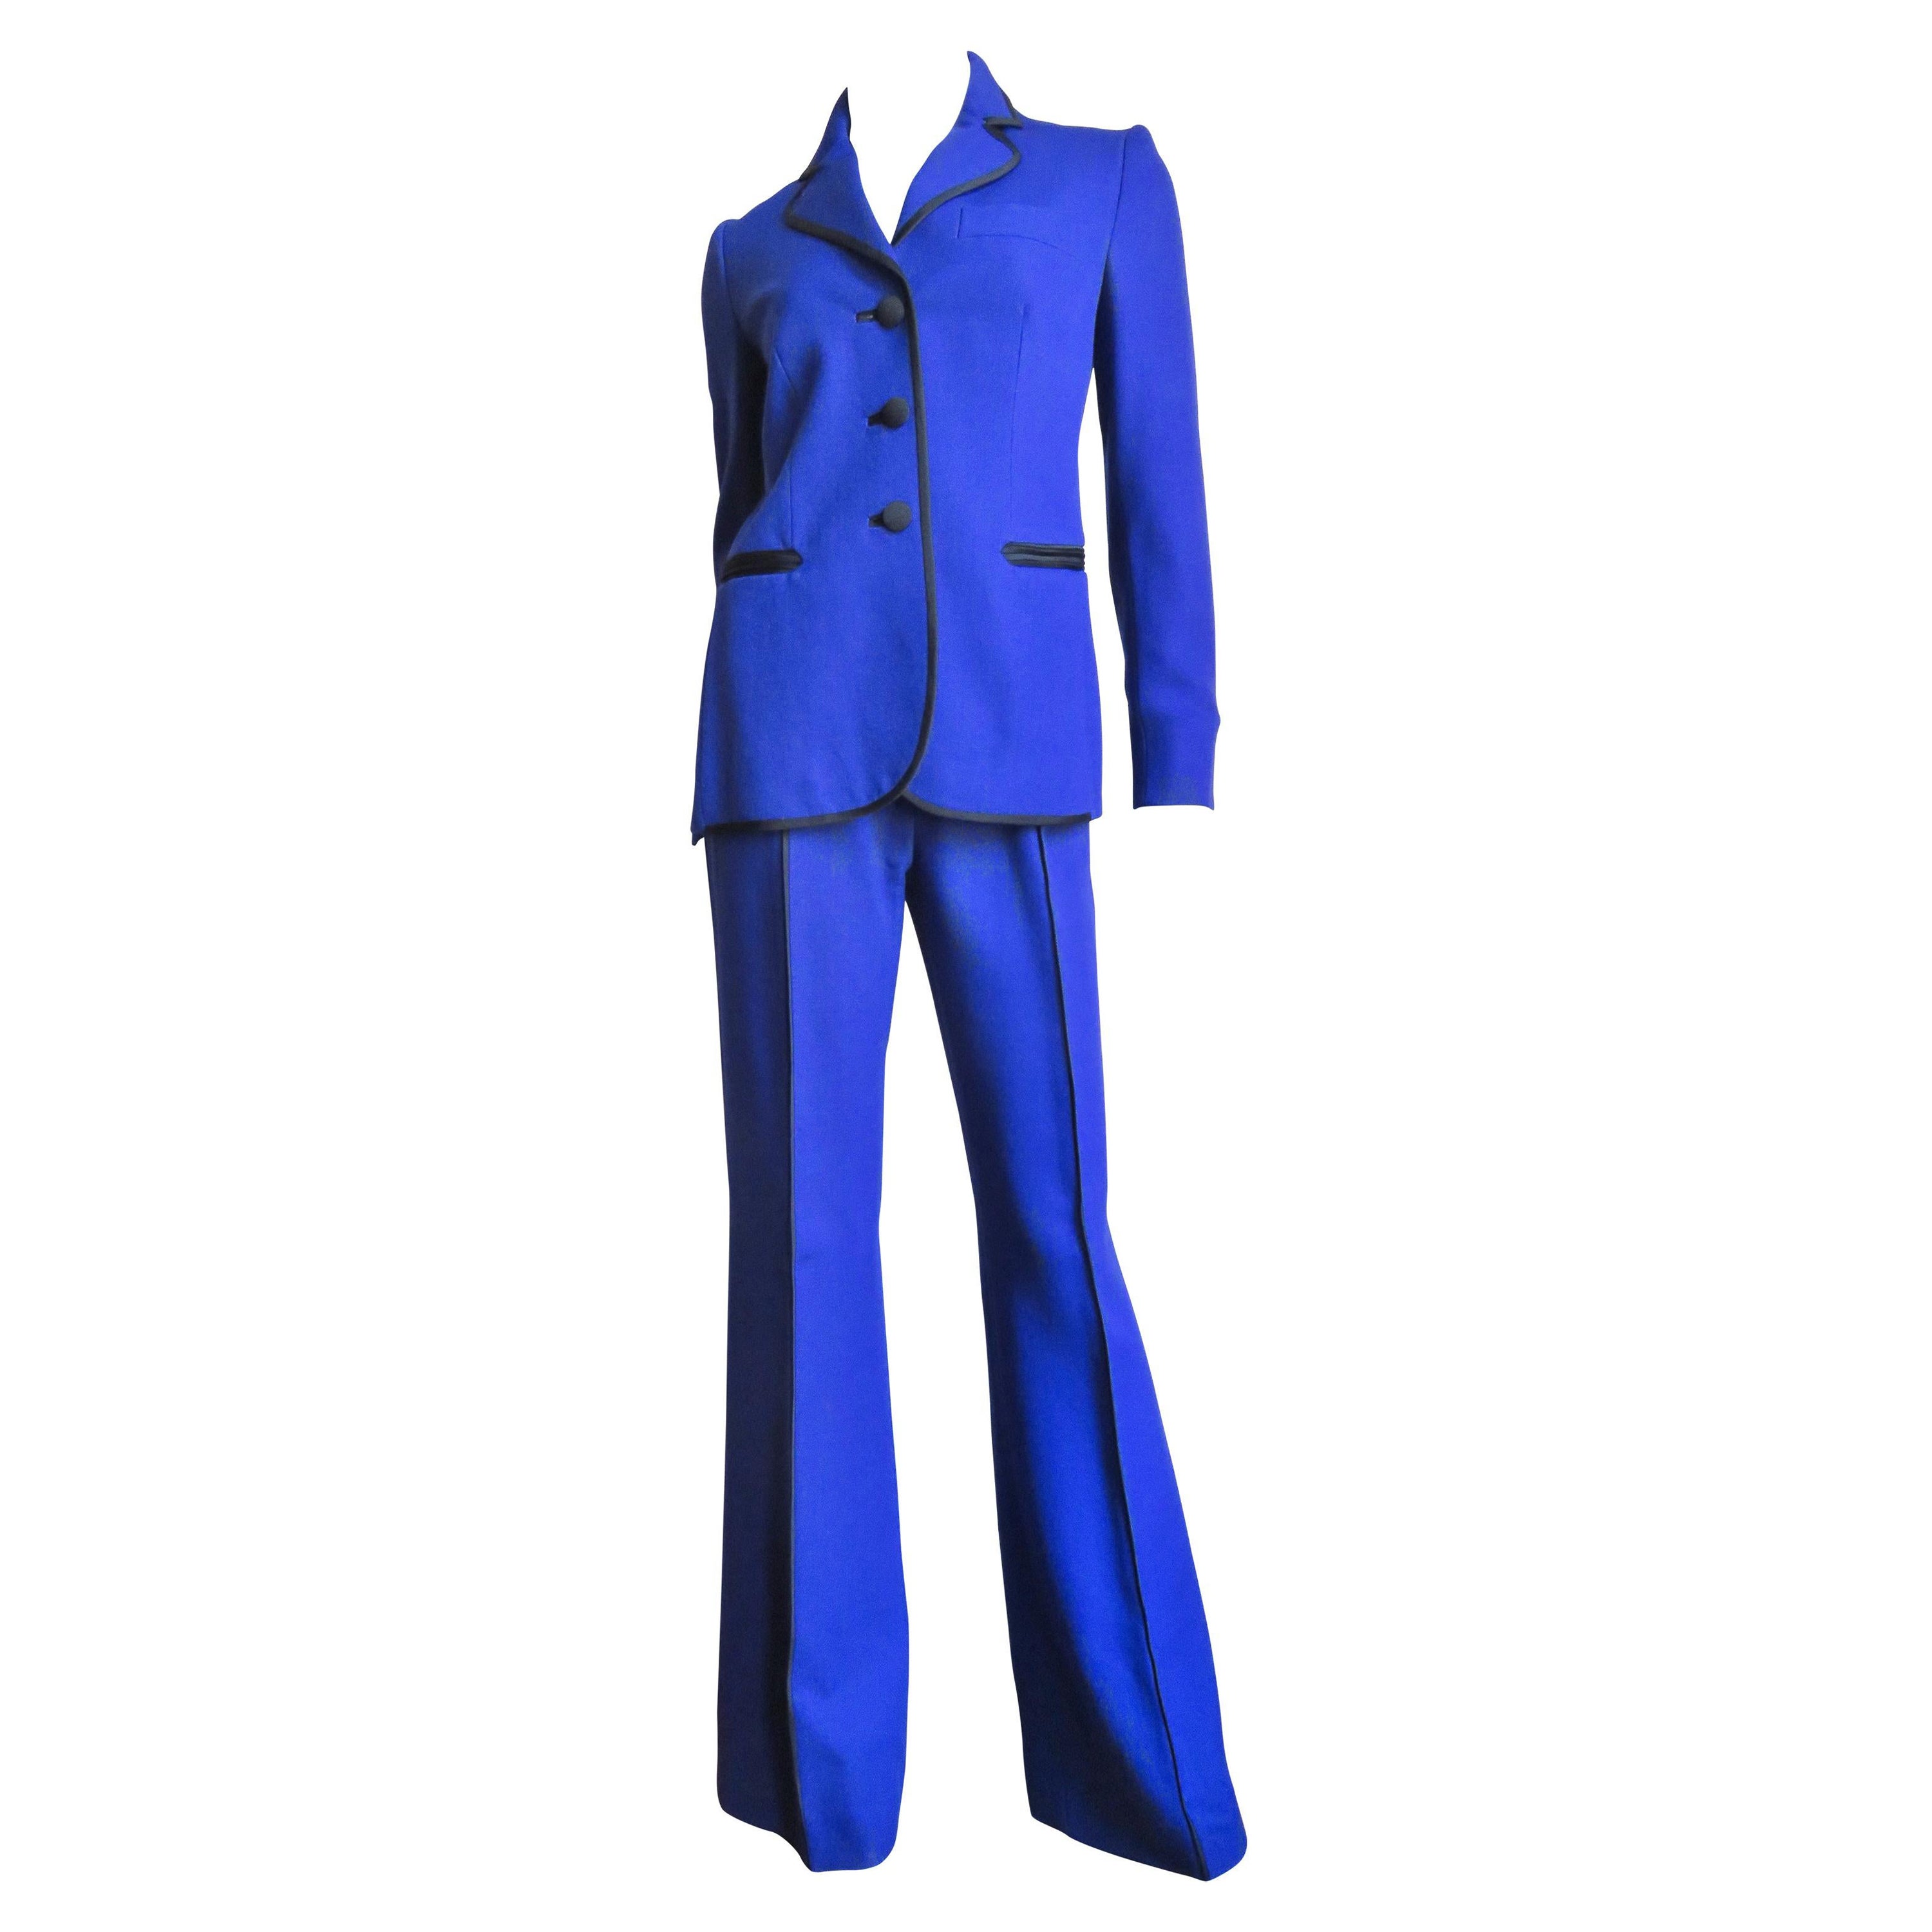 Moschino Color Block Pantsuit with Applique Eyes Collar